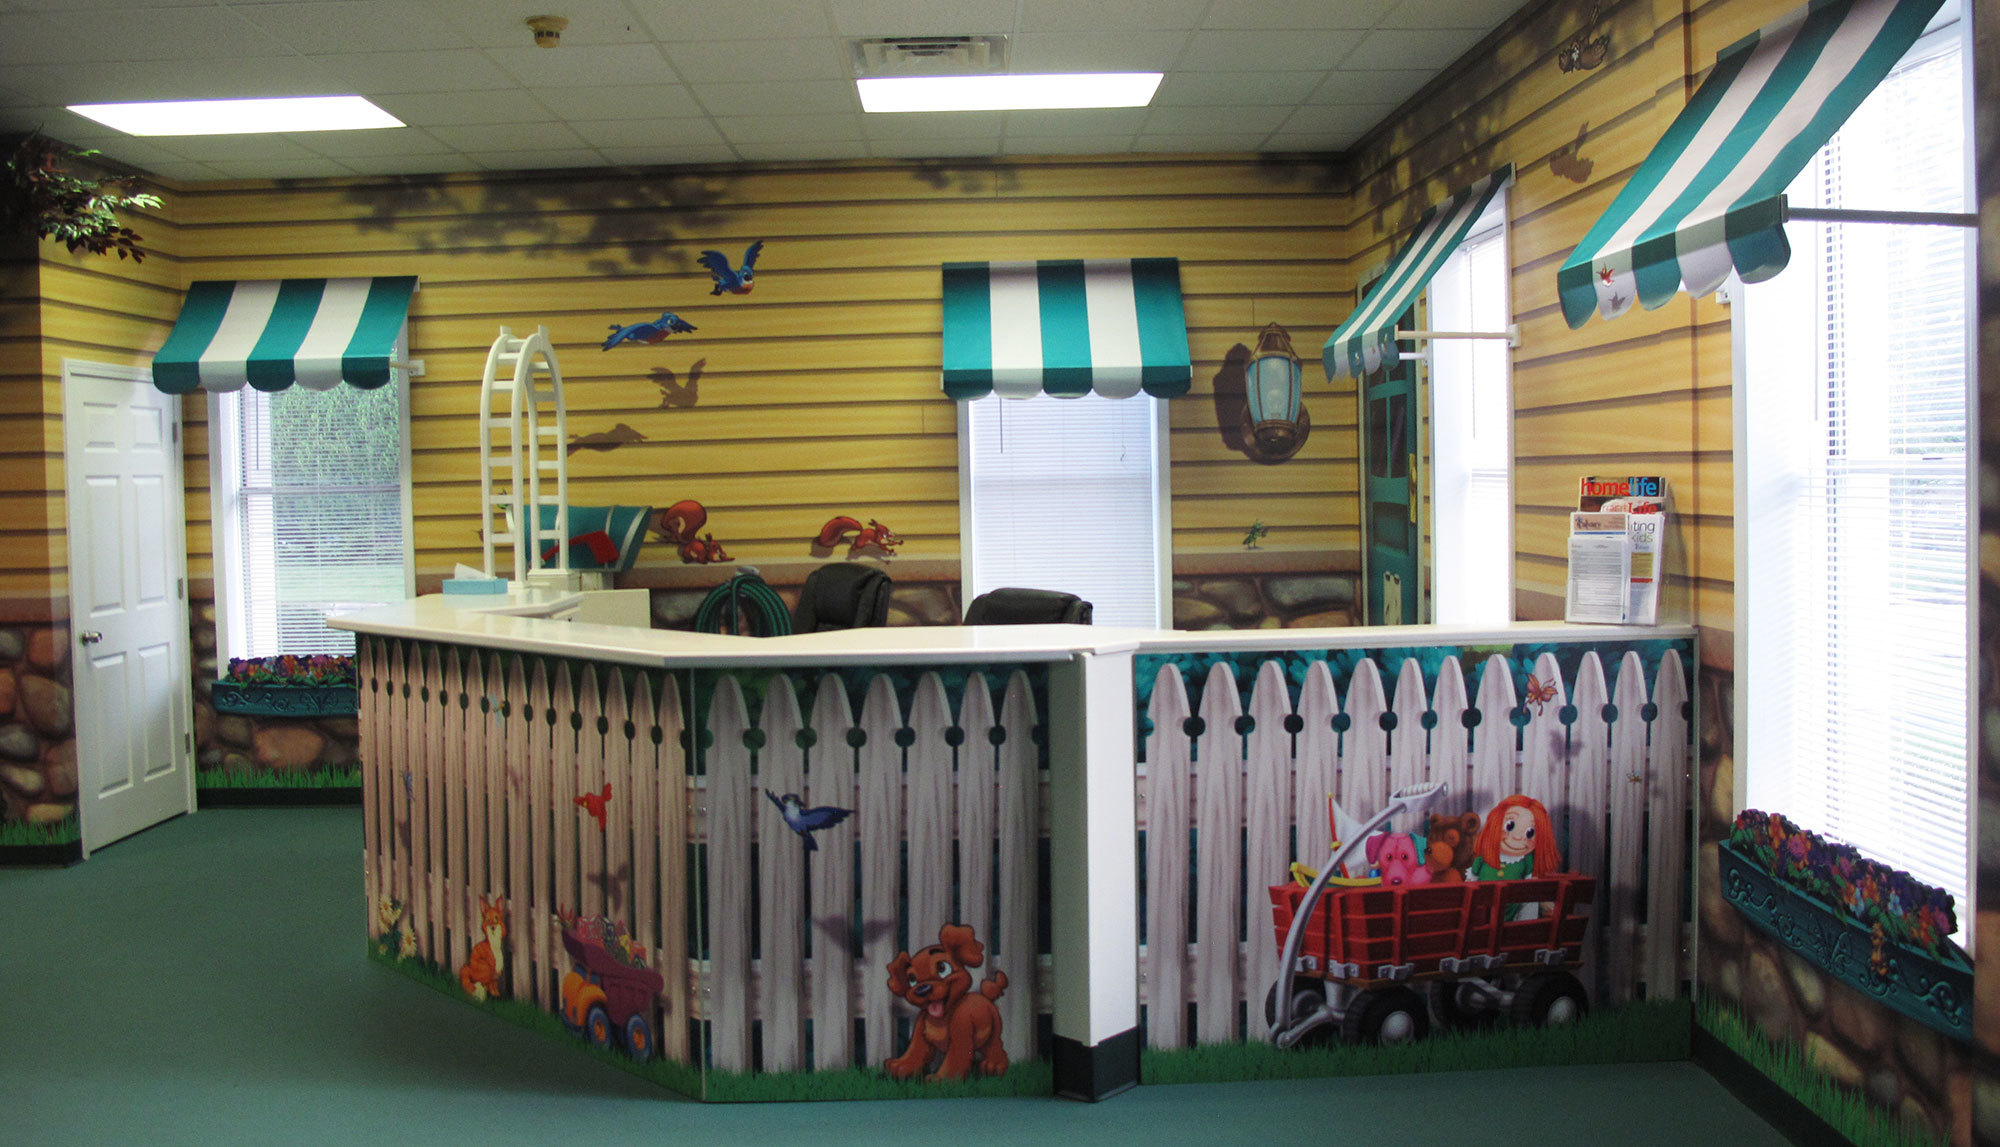 Neighborhood Themed Check In Area with white picket fence desk wrap and yellow house murals with green and white awnings over windows at a Church